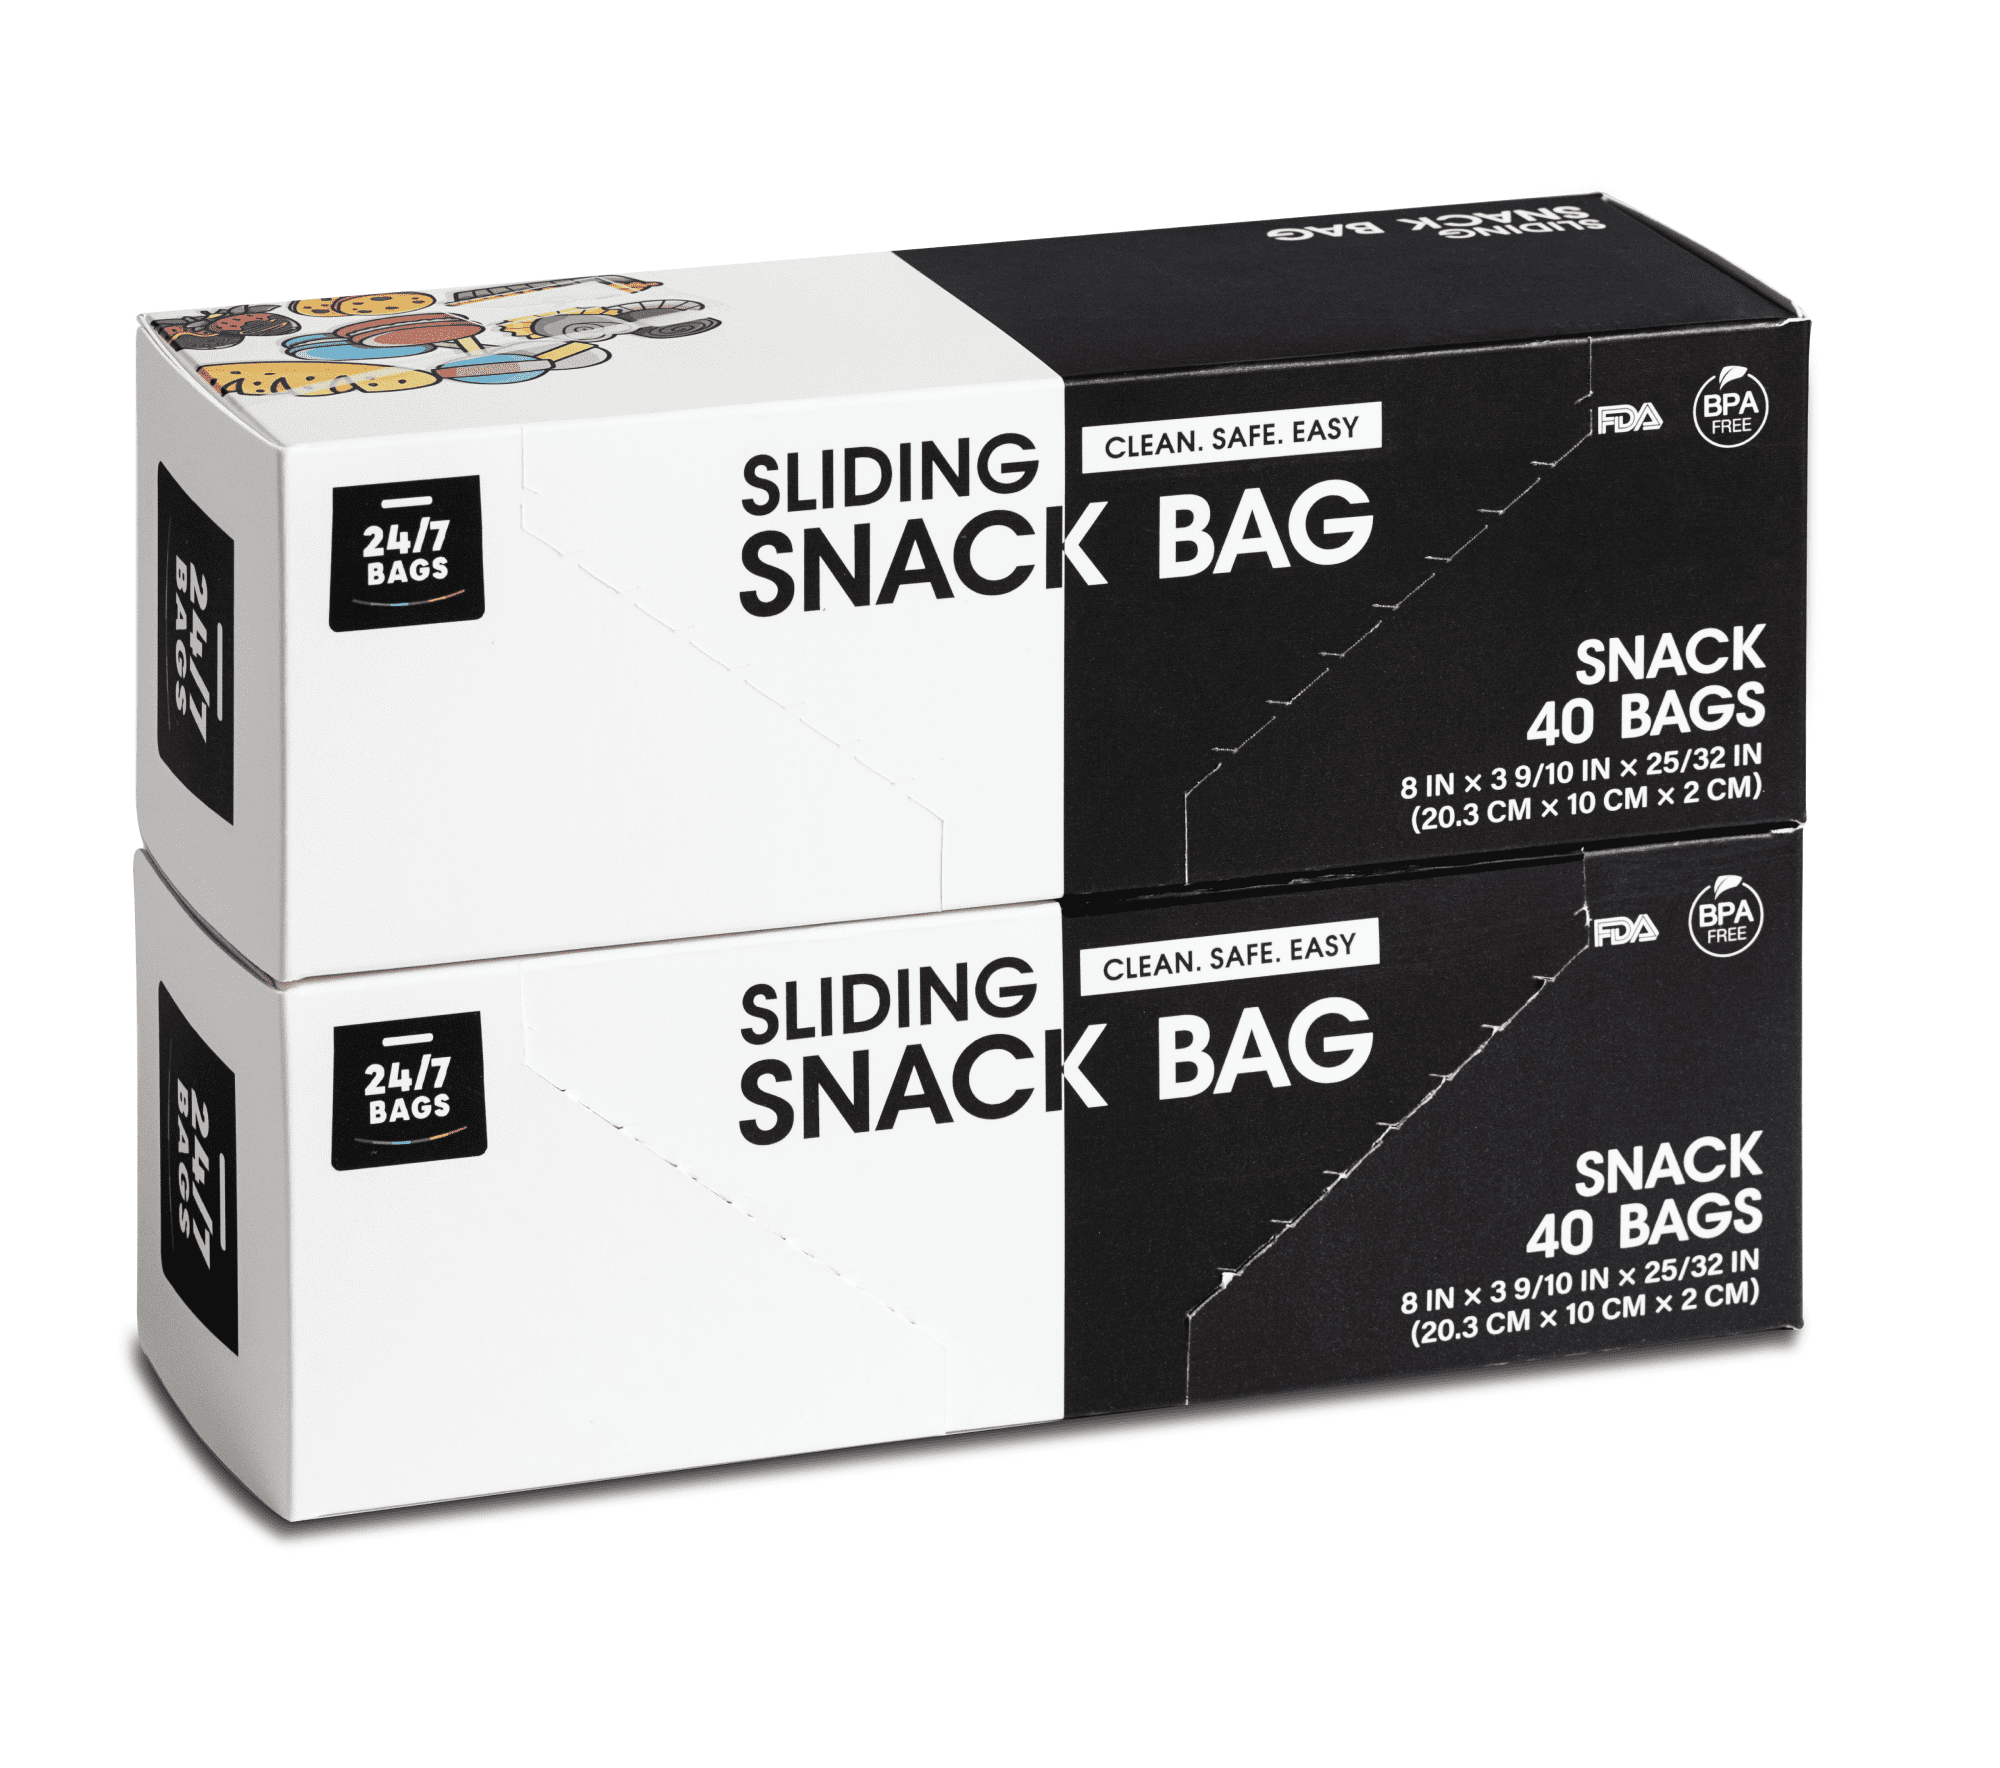 24/7 Bags- XXL Storage Bags, 20 Gallons, 9 Count, Expandable Bottom With  Carry Handle 